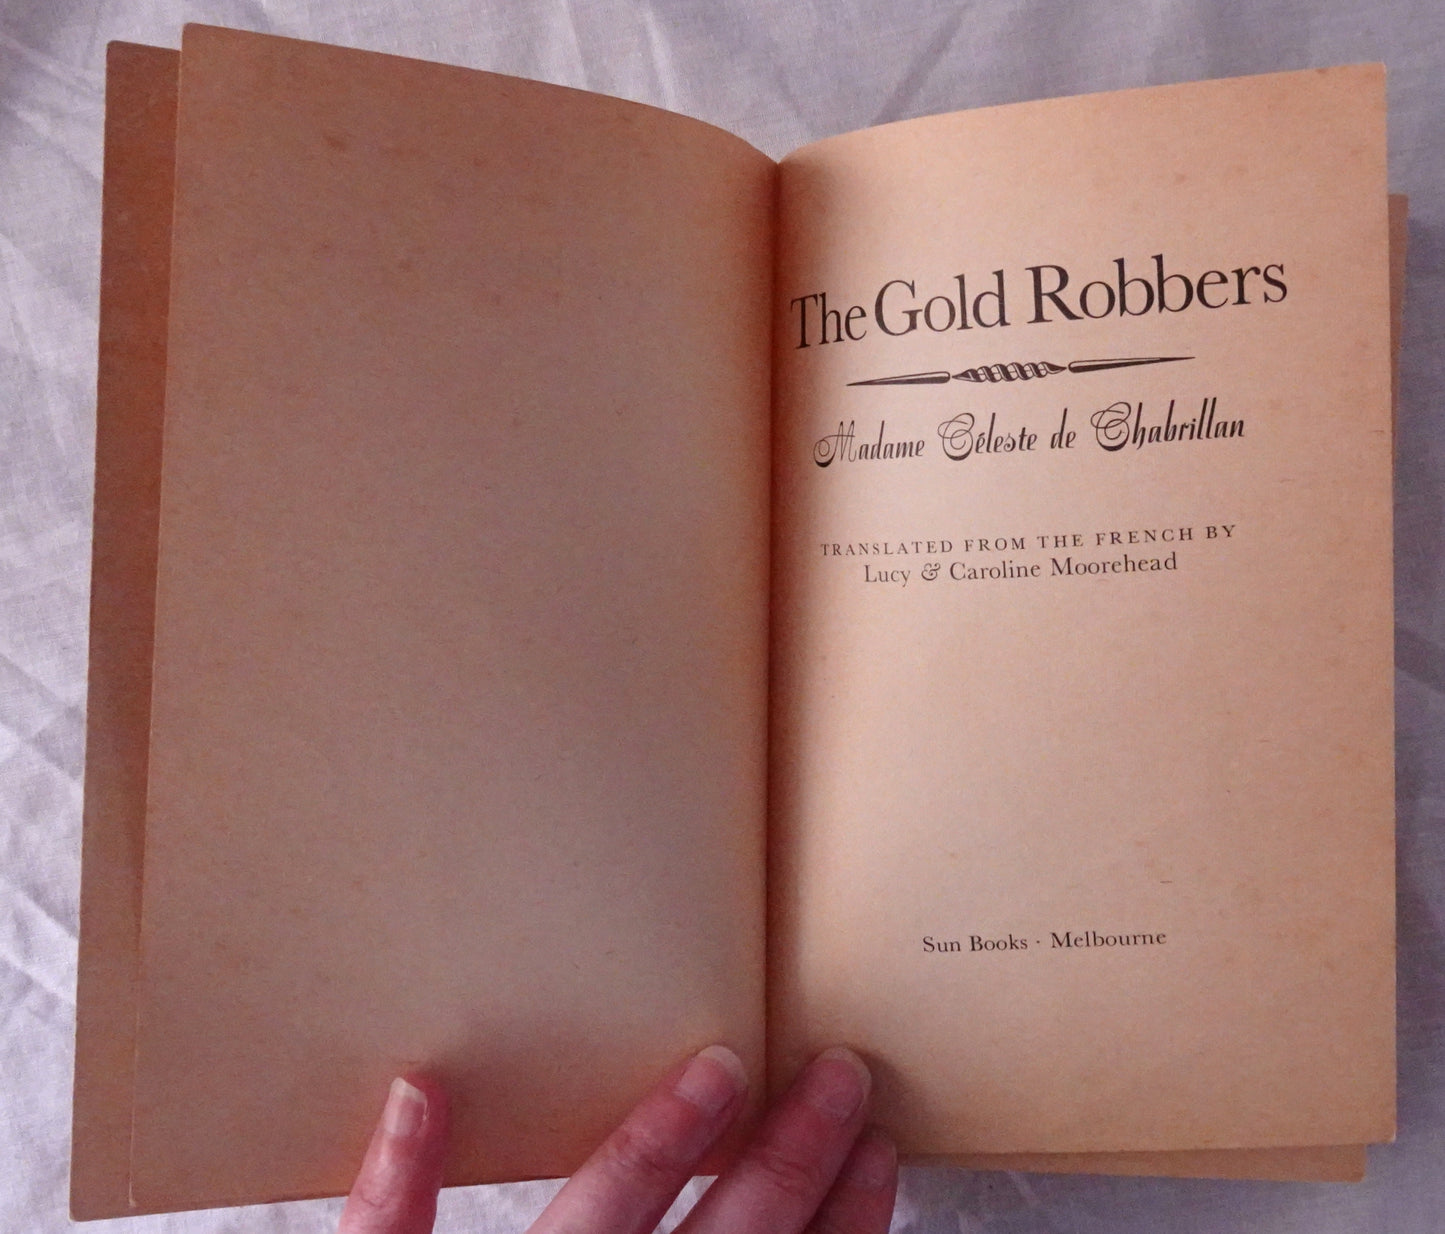 The Gold Robbers by Celeste de Chabrillan